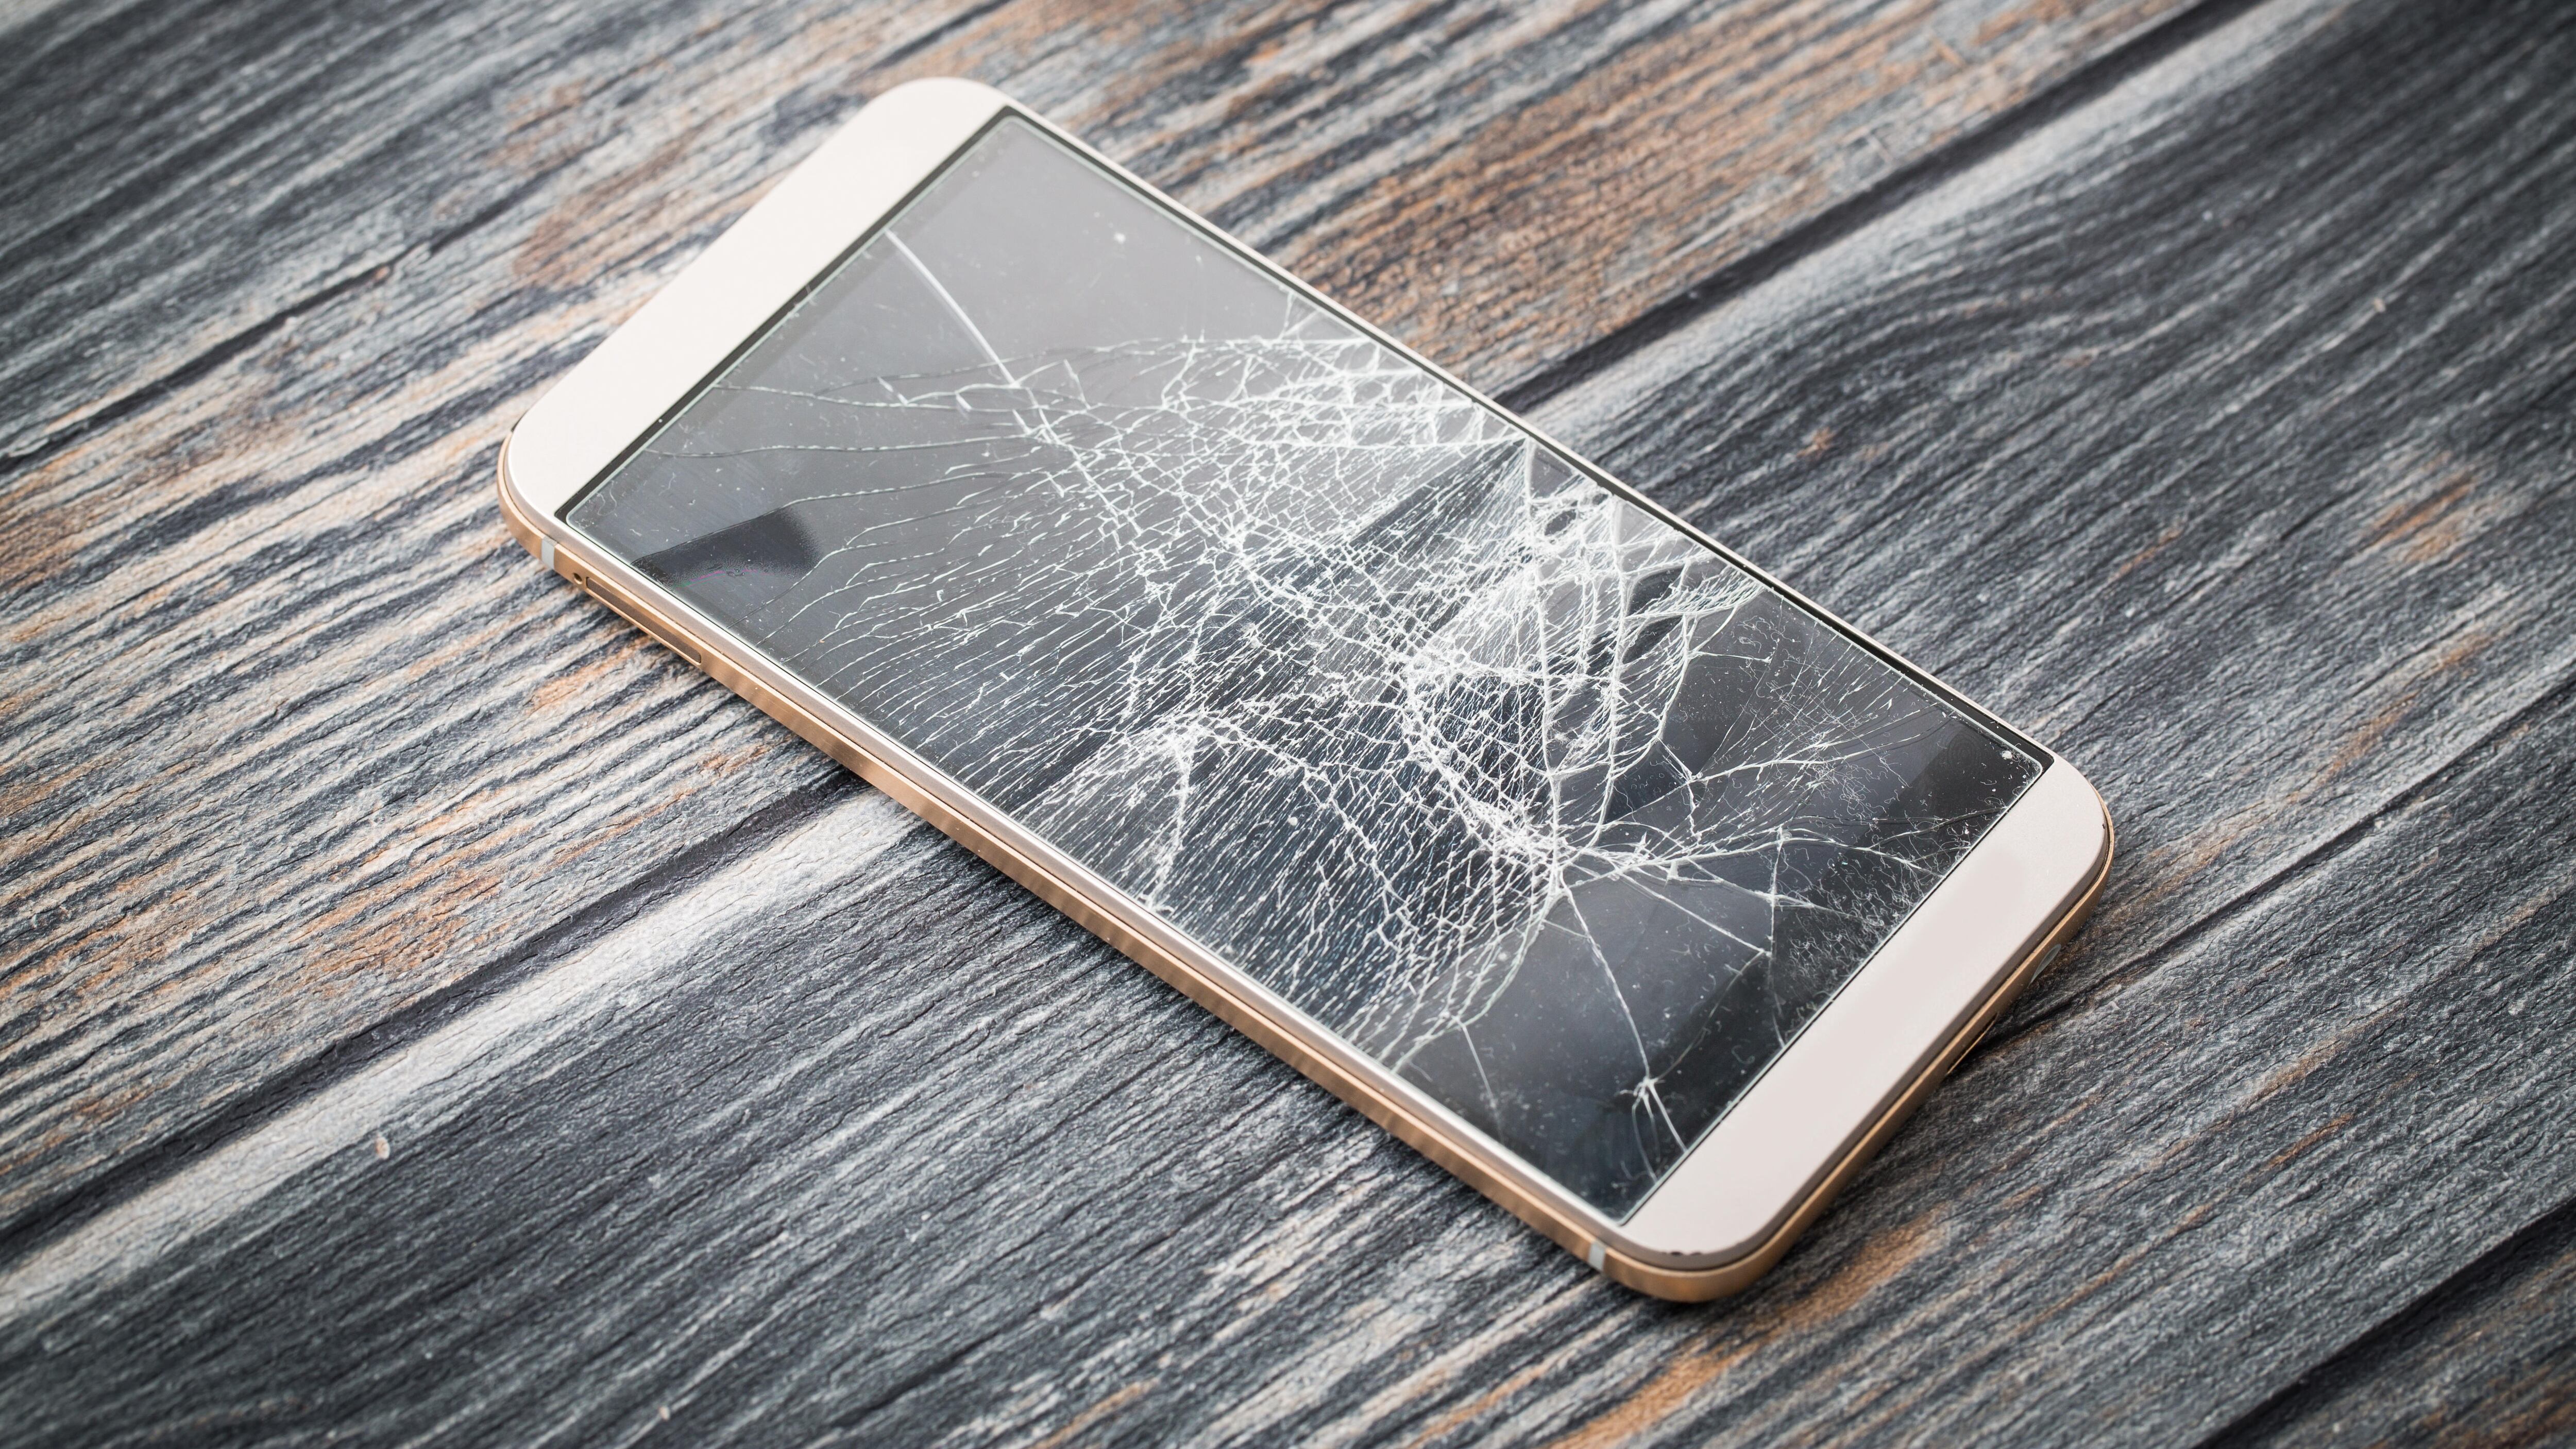 If your phone has seen better days, what should you do with it?